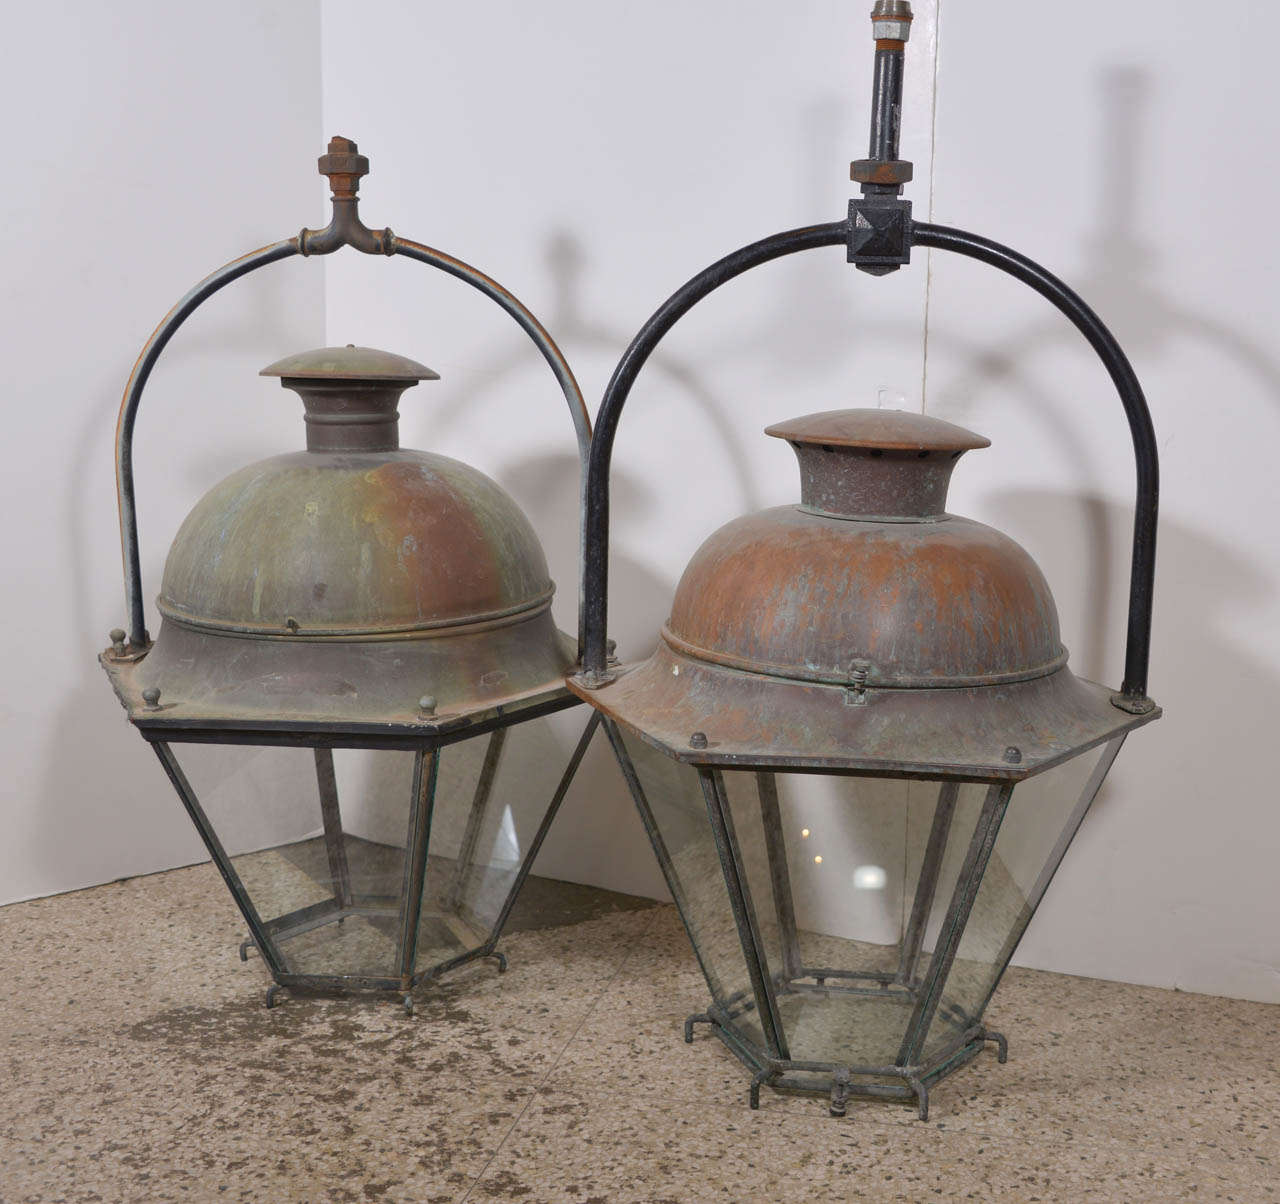 Large French copper lantern, octagonal design. Two lanterns available.